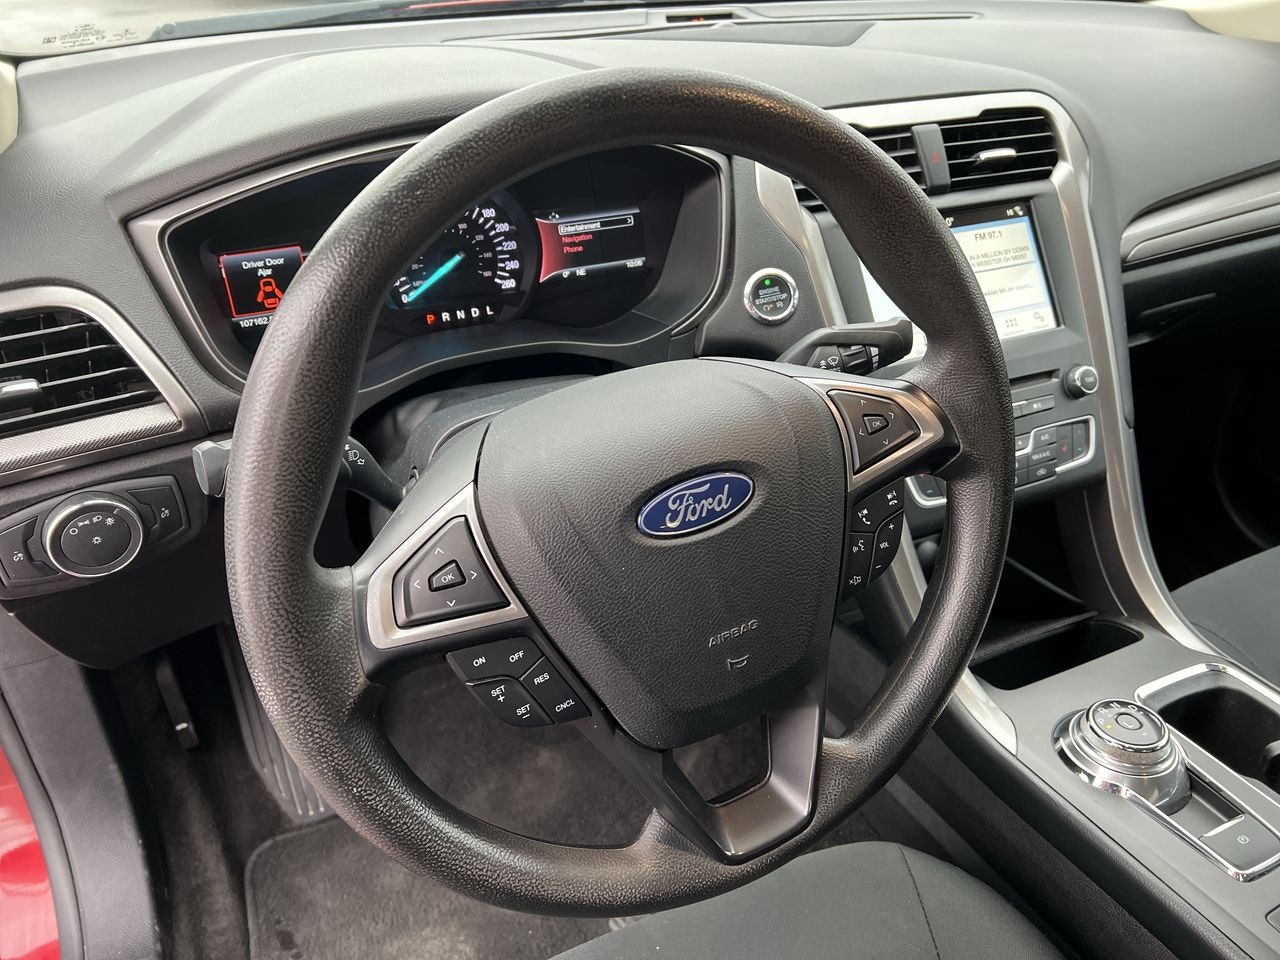 2018 Ford Fusion - P20810 Full Image 14